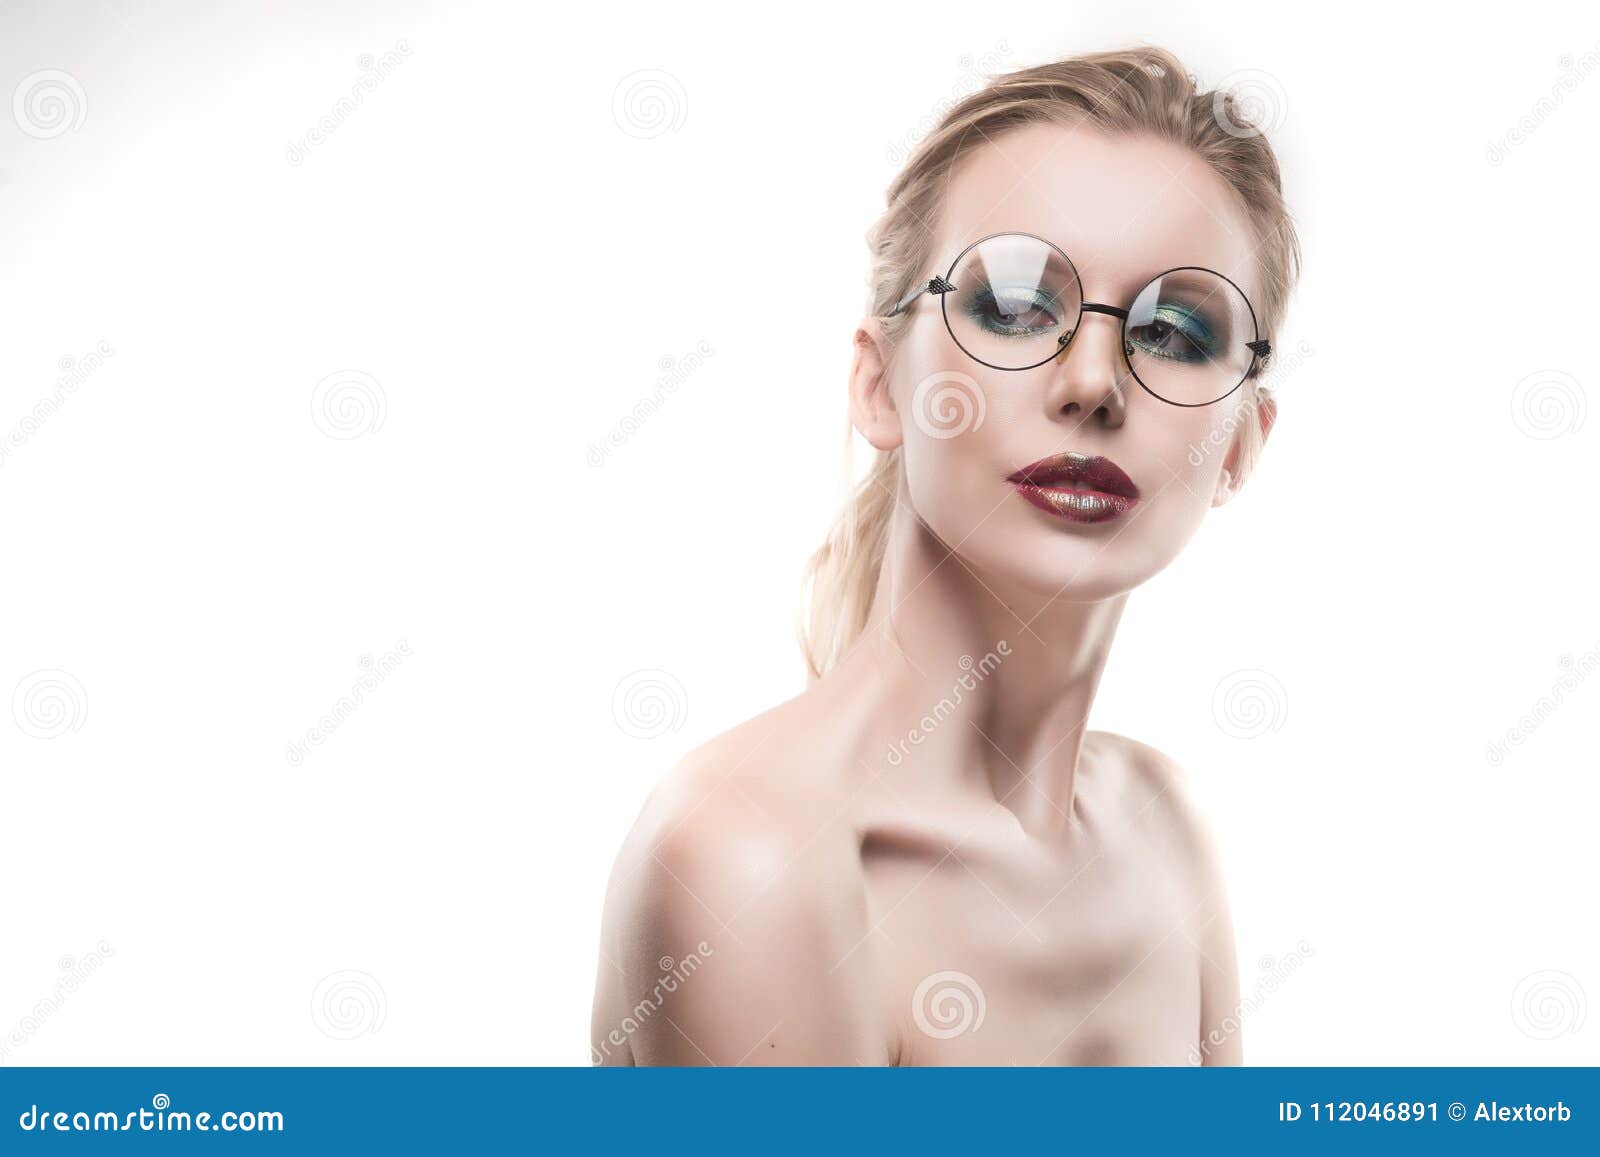 Women With Glasses Porn - Hot naked woman wearing glasses stock photo - Best adult videos and photos